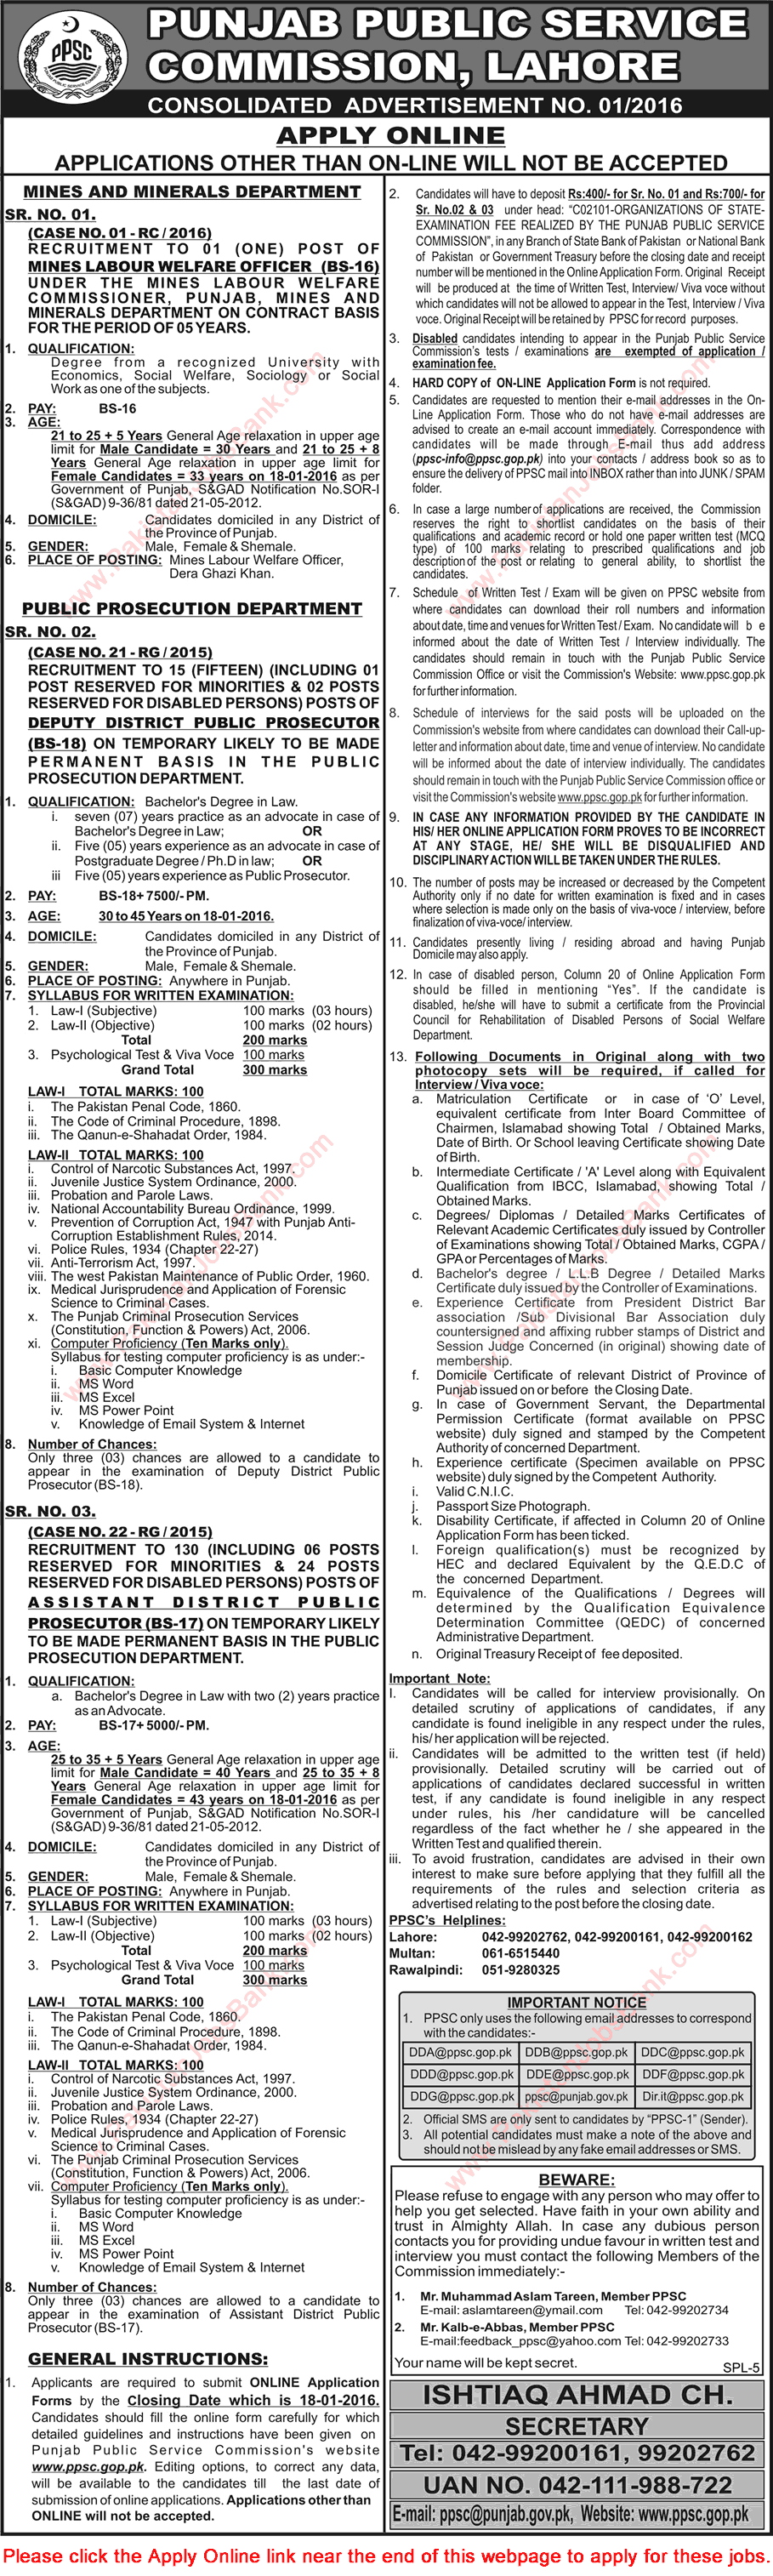 PPSC Jobs 2016 January Consolidated Advertisement No. 01/2016 1/2016 Apply Online Latest